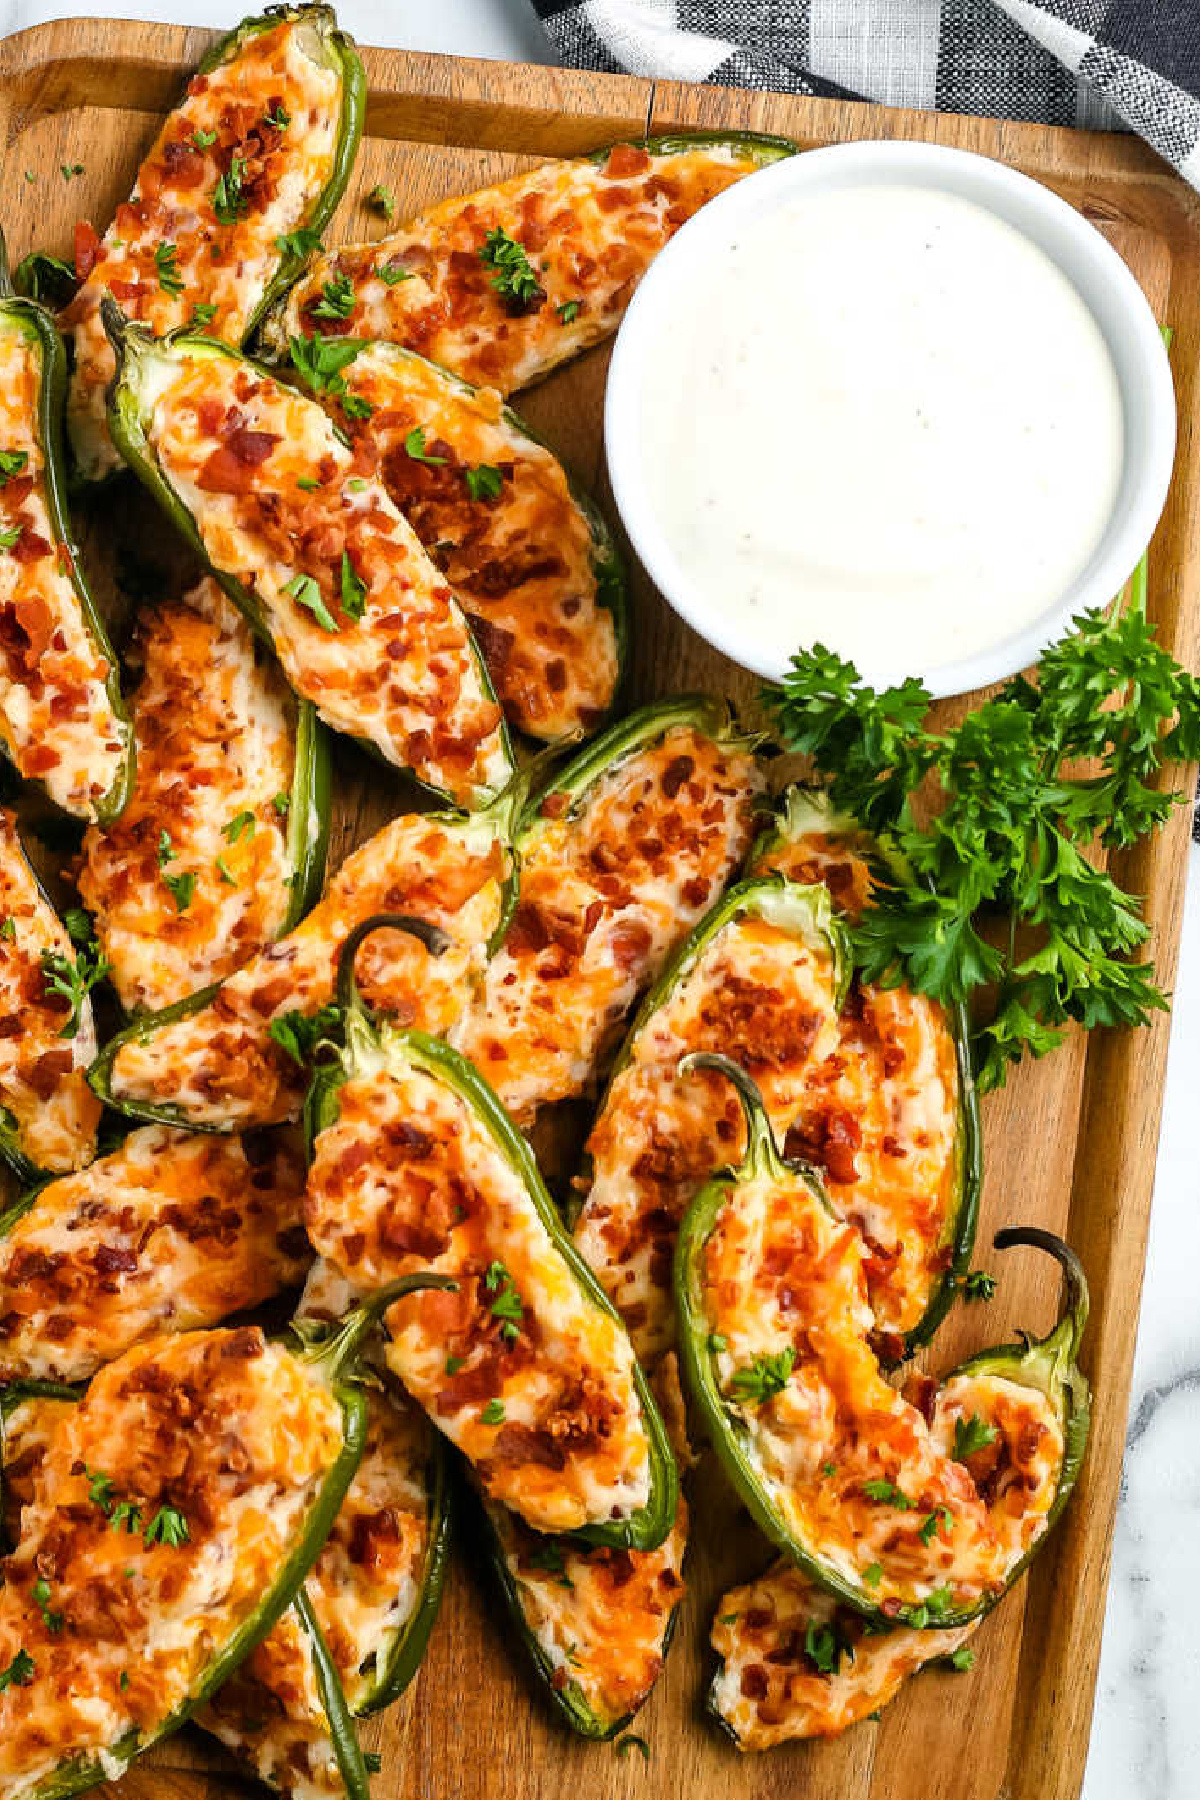 Cheap Party Food Ideas - Stuffed Jalapeños with Cream Cheese